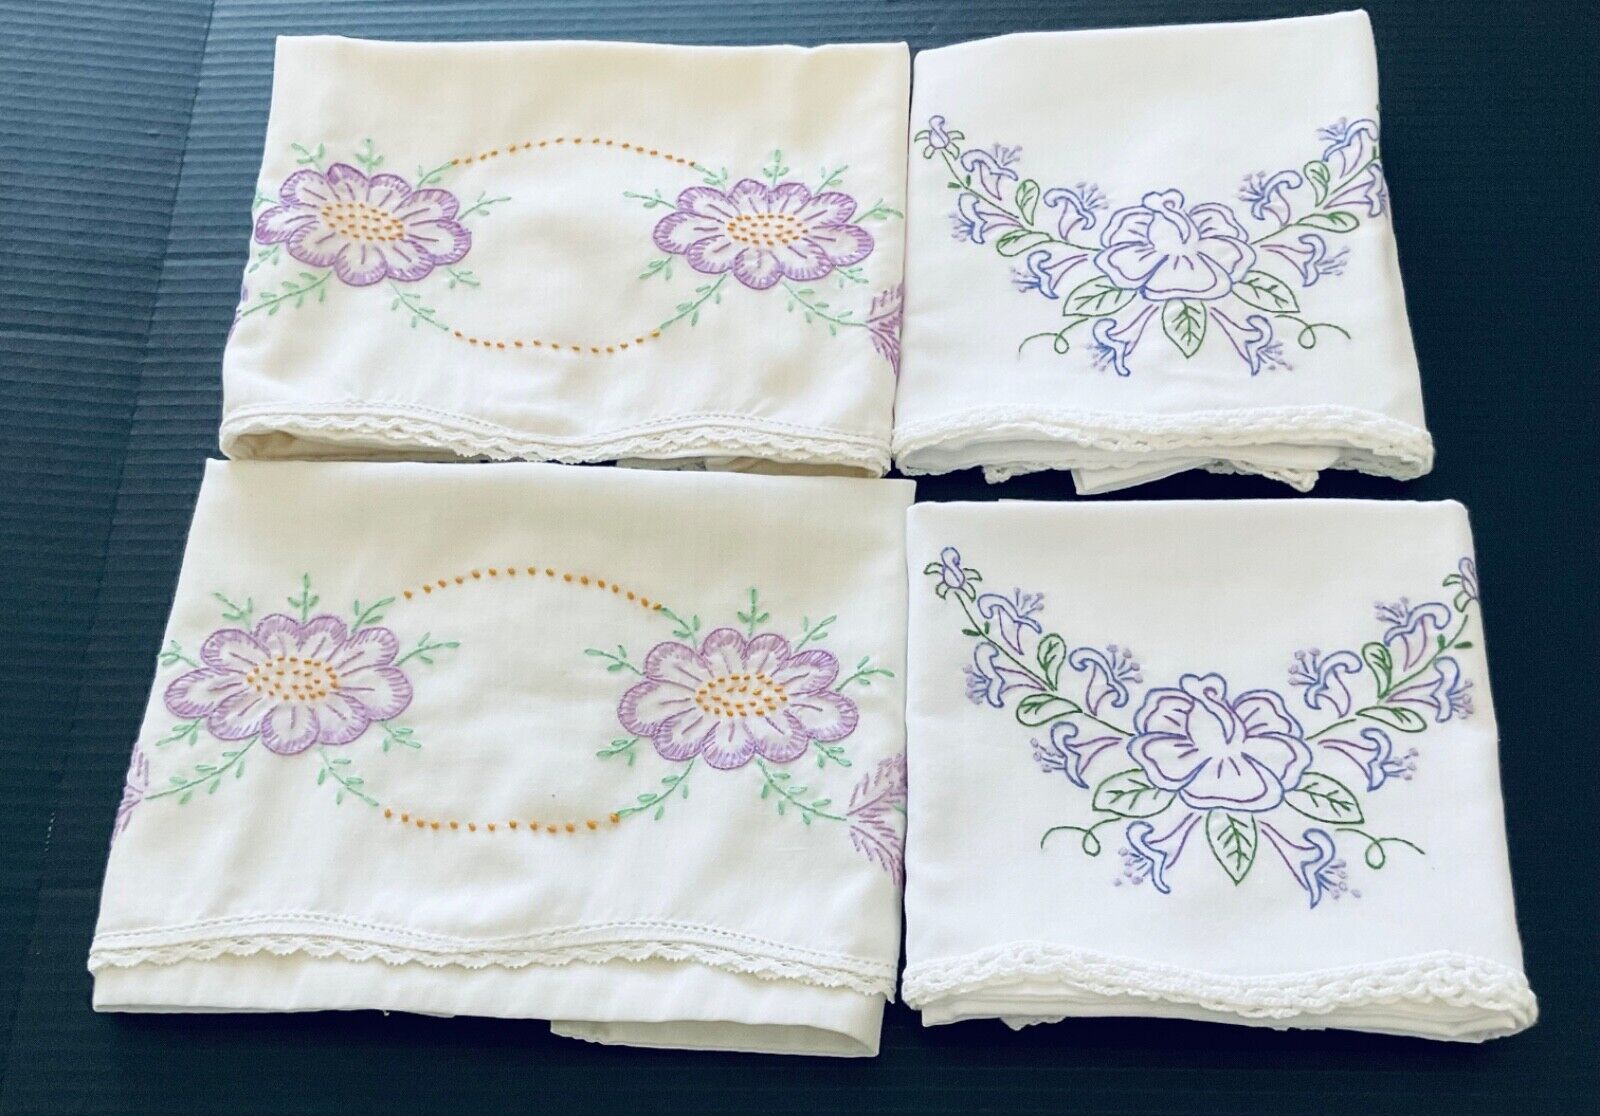 2 Sets of Embroidered/Crochet  Lavender Floral patternPillow Cases. 